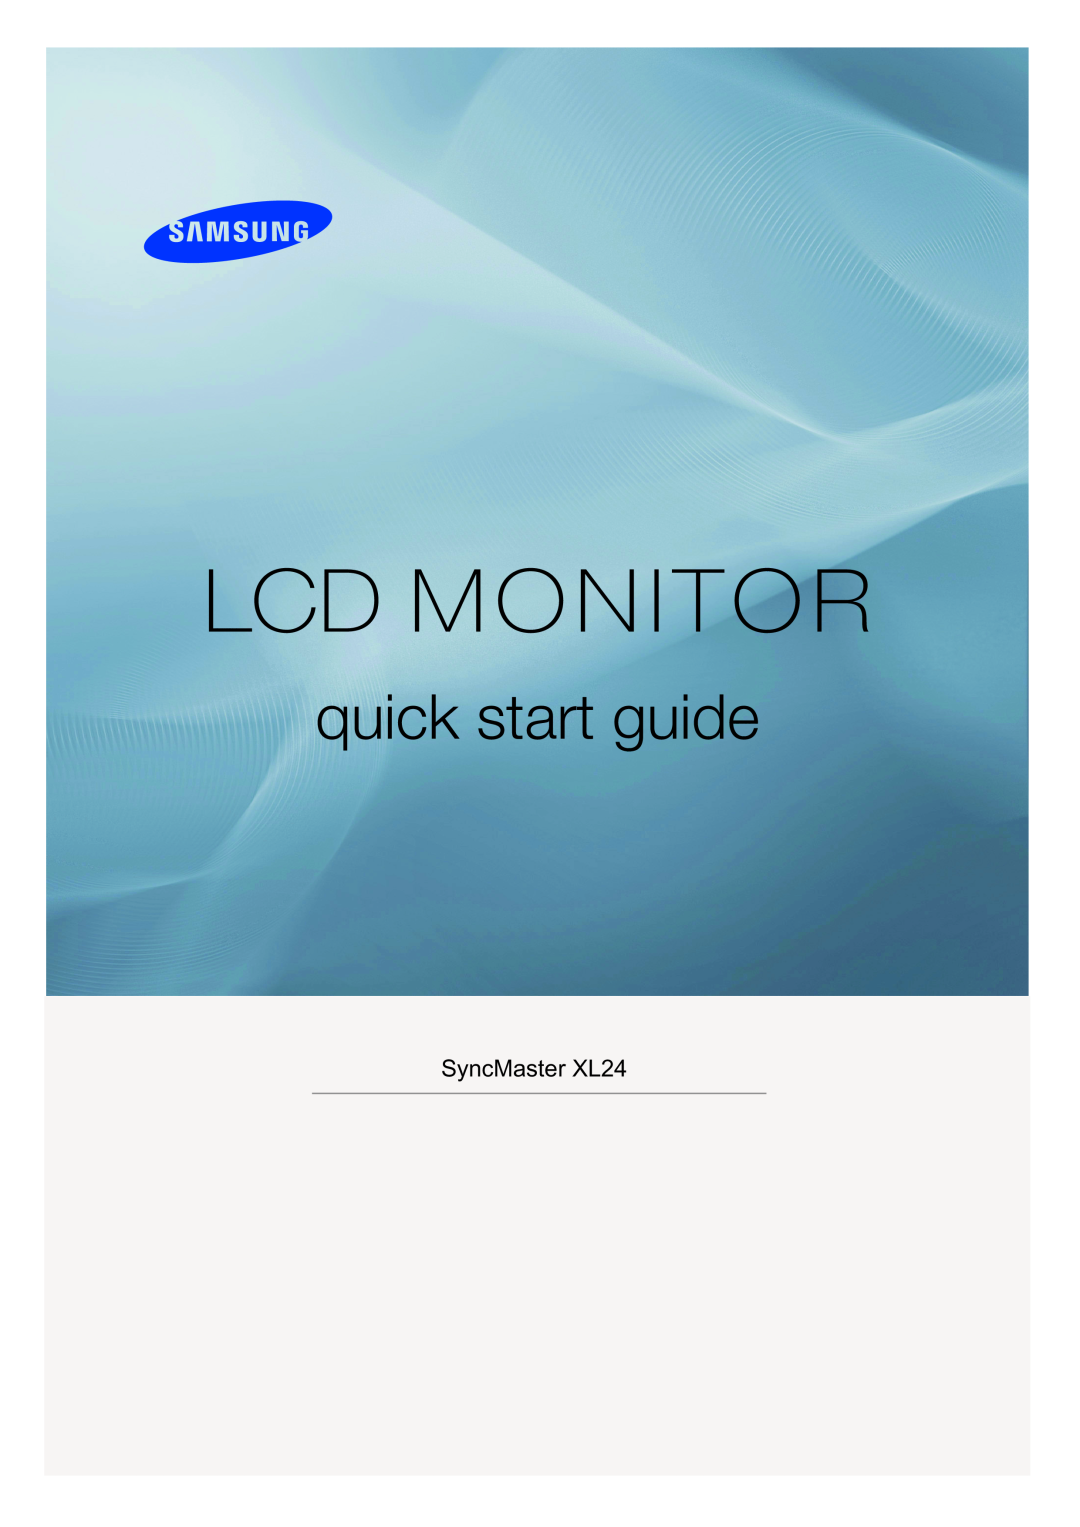 Samsung quick start Lcd Monitor, quick start guide, SyncMaster XL24 